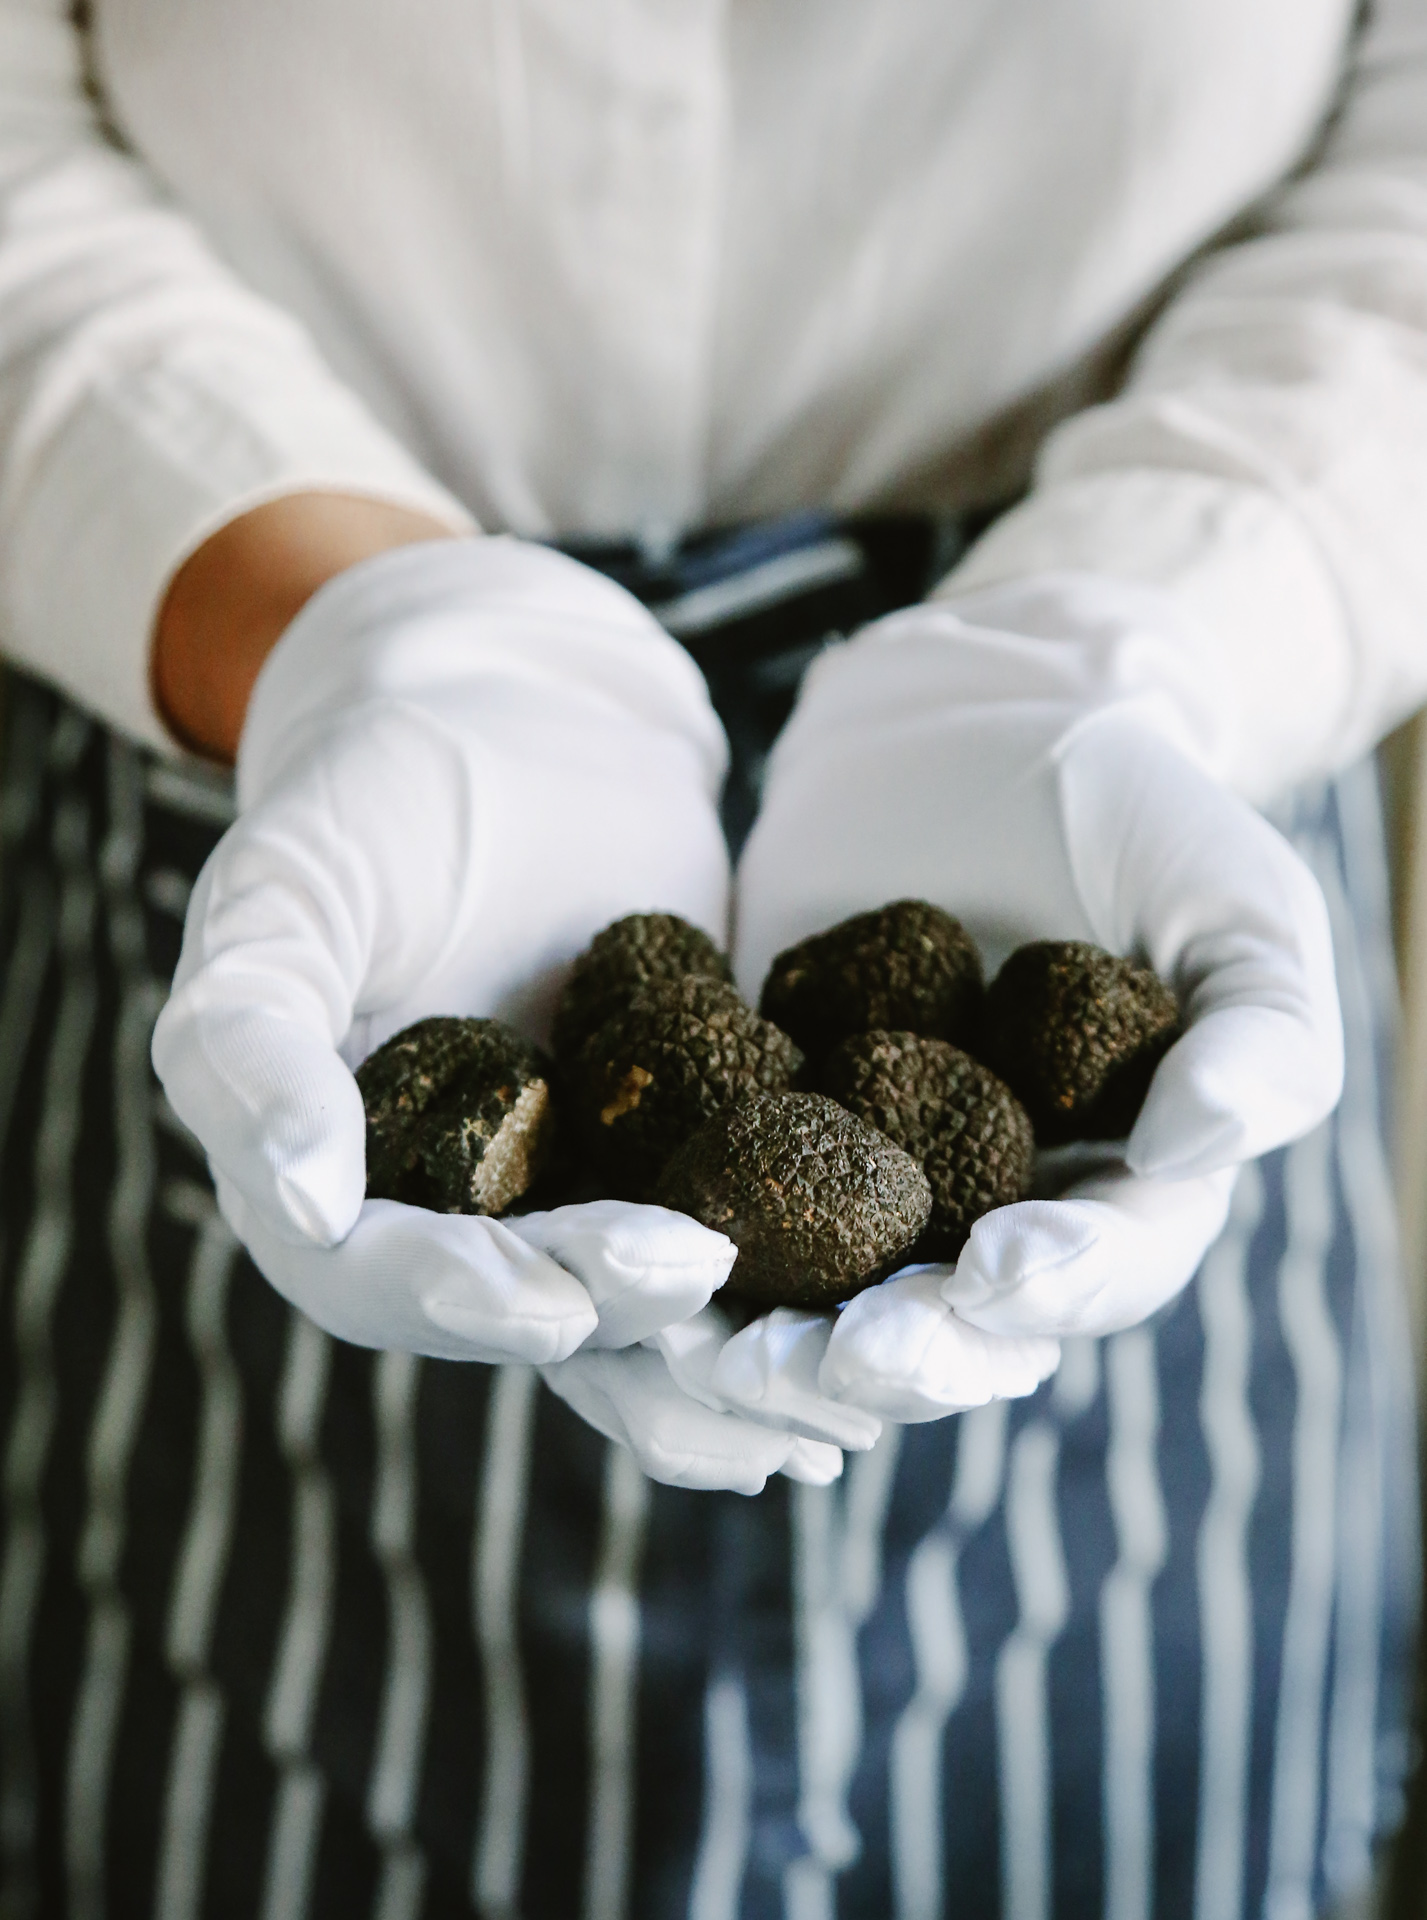 Swiss Deluxe Hotels Stories Winter 2020 Hunting Truffles 01Stocksy Txp761a5286xbq200 Originaldelivery 2495268 T140 Ecirgb